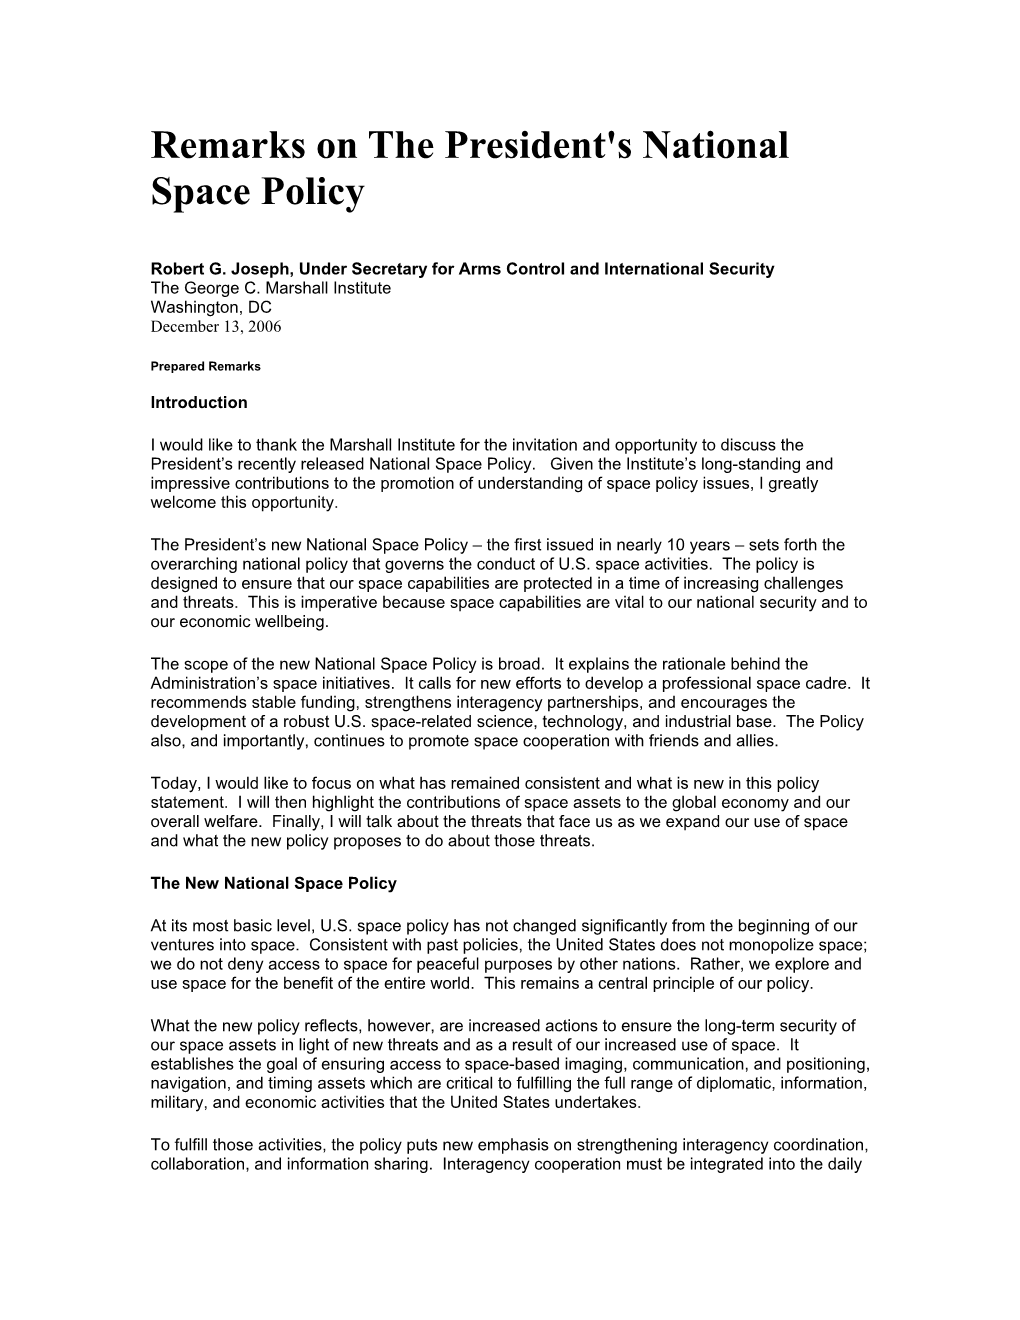 Remarks on the President's National Space Policy